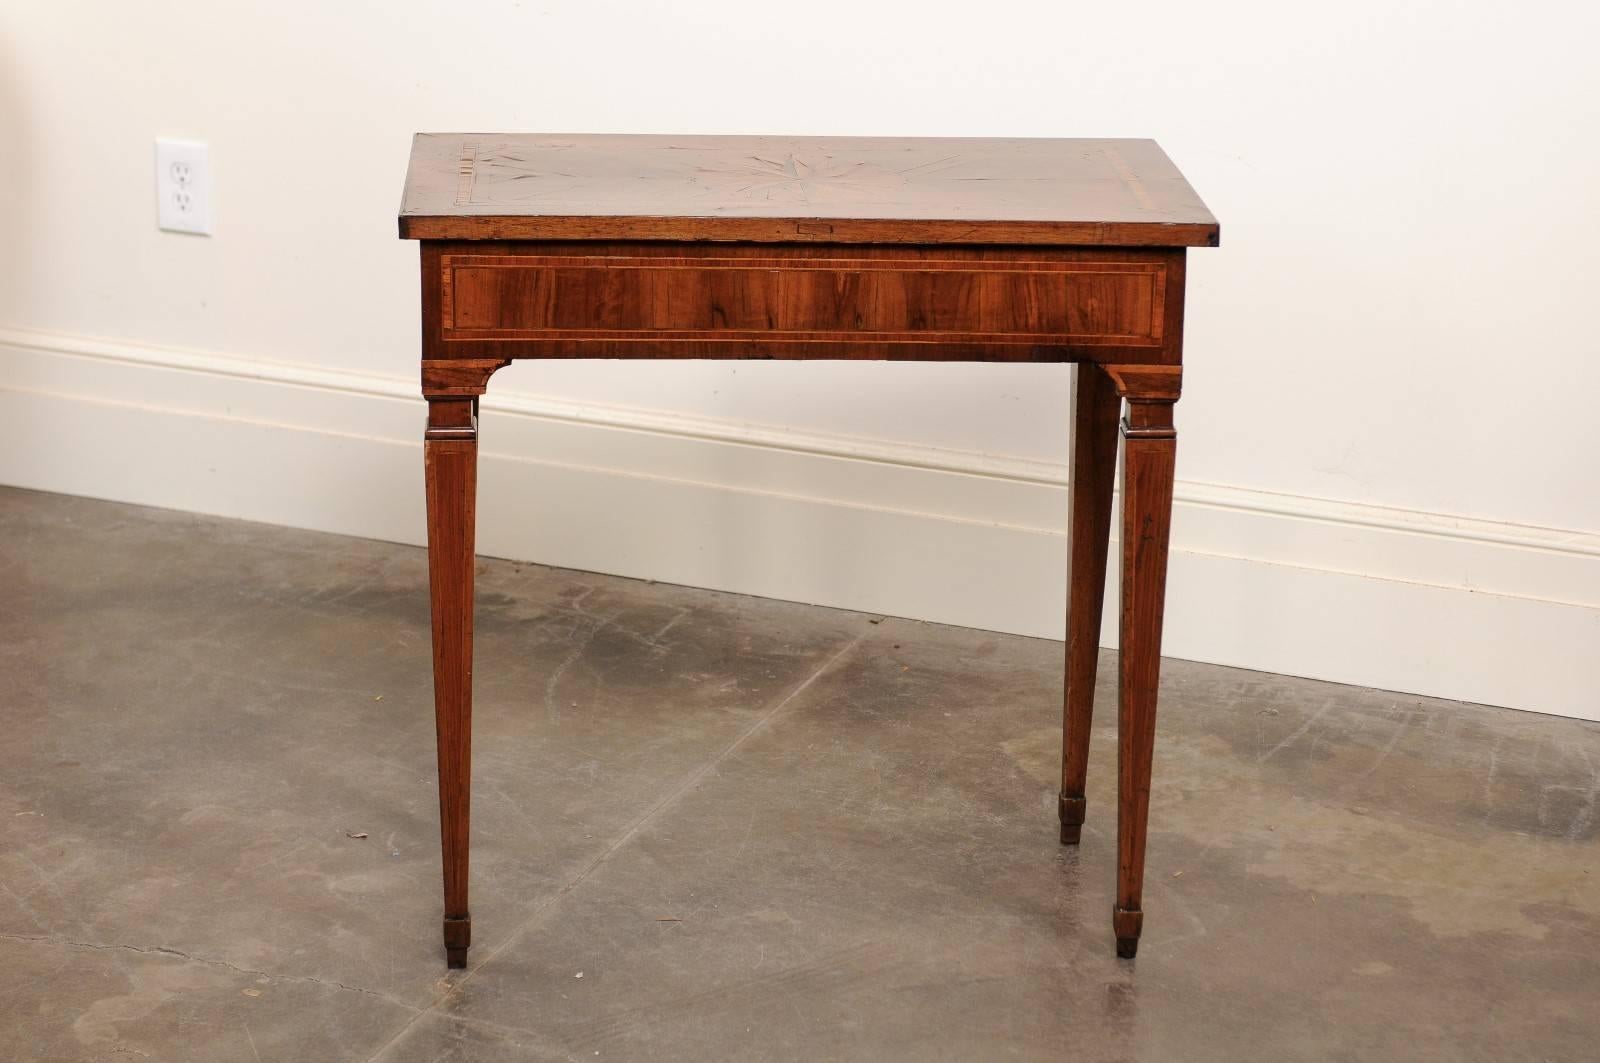 Italian 18th Century Console Table with Marquetry Inlaid Top and Tapered Legs In Good Condition For Sale In Atlanta, GA